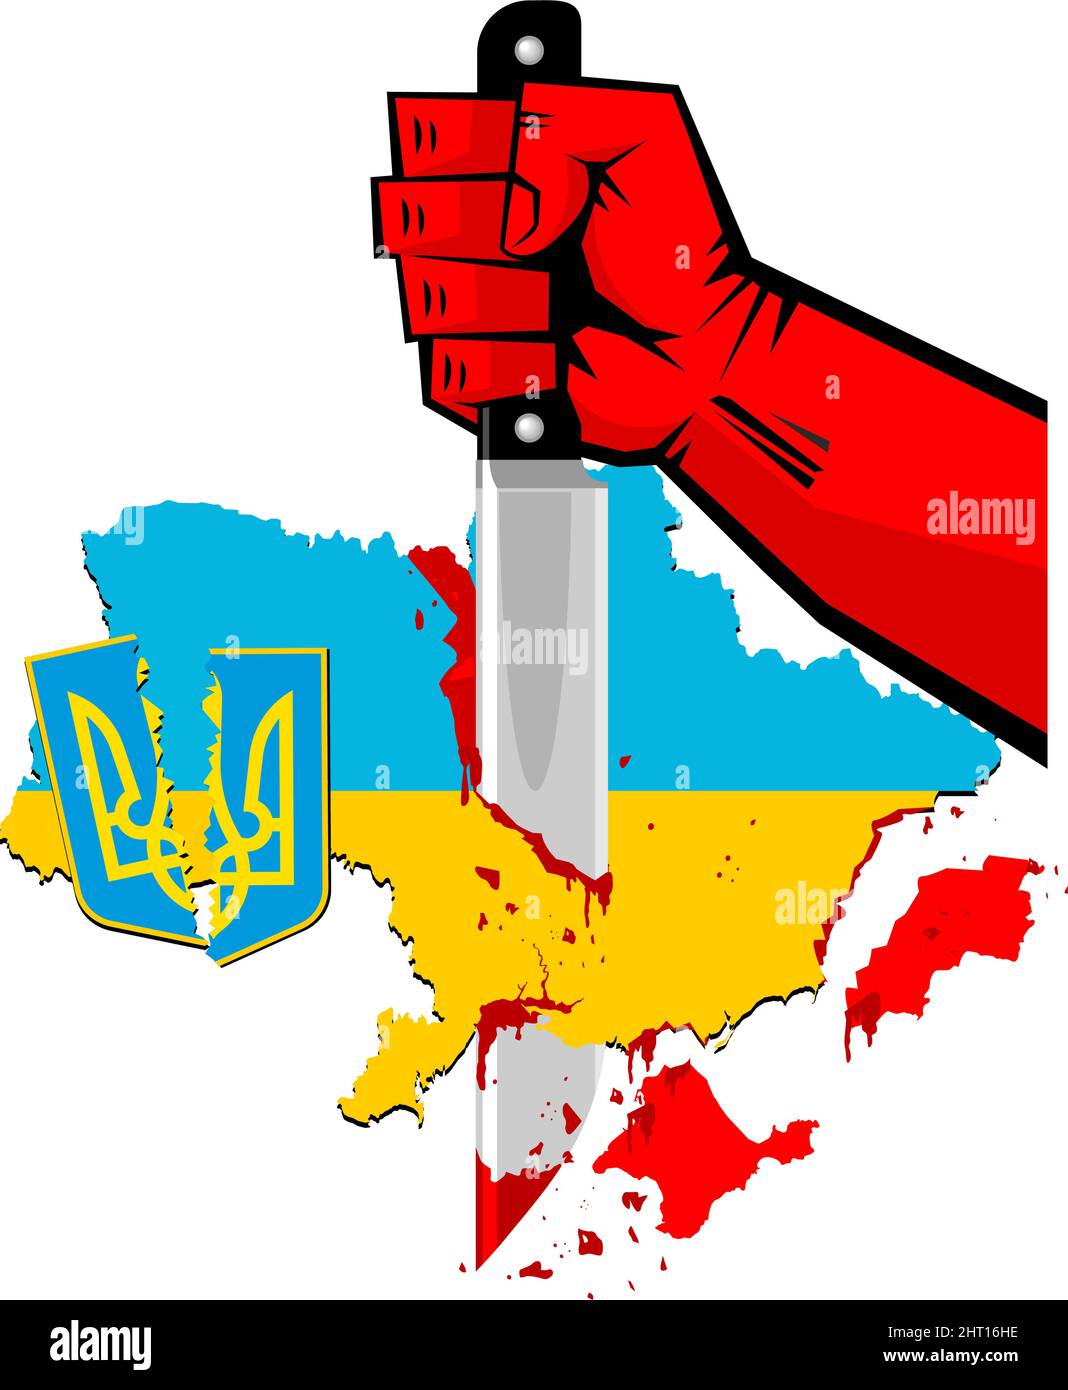 No war, no blood. Ukrainian military poster. The red hand of Russia cuts Ukraine with knife. Vector Stock Vector